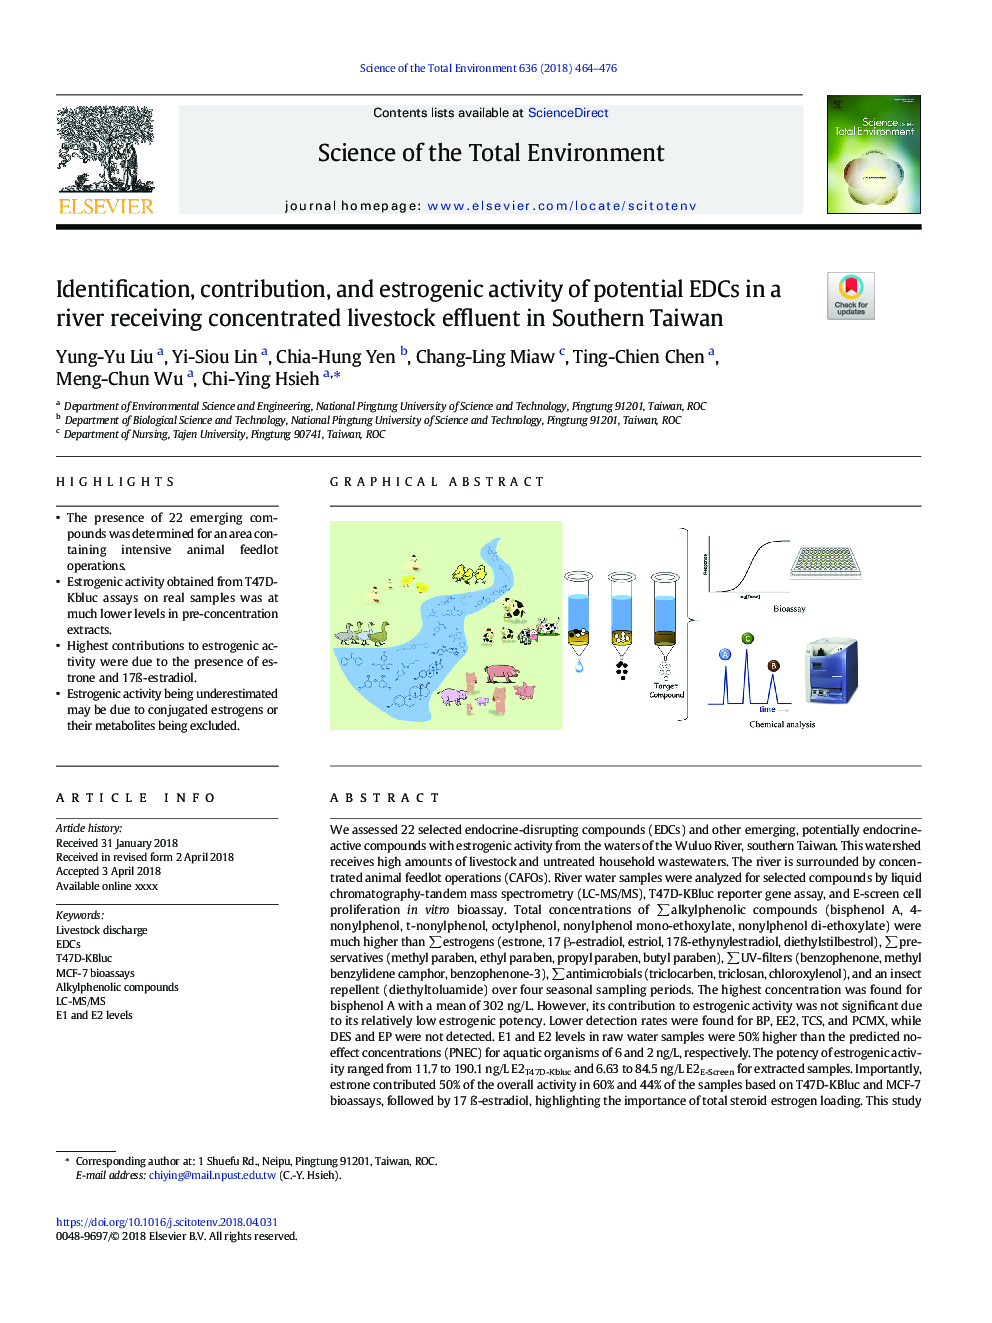 Identification, contribution, and estrogenic activity of potential EDCs in a river receiving concentrated livestock effluent in Southern Taiwan